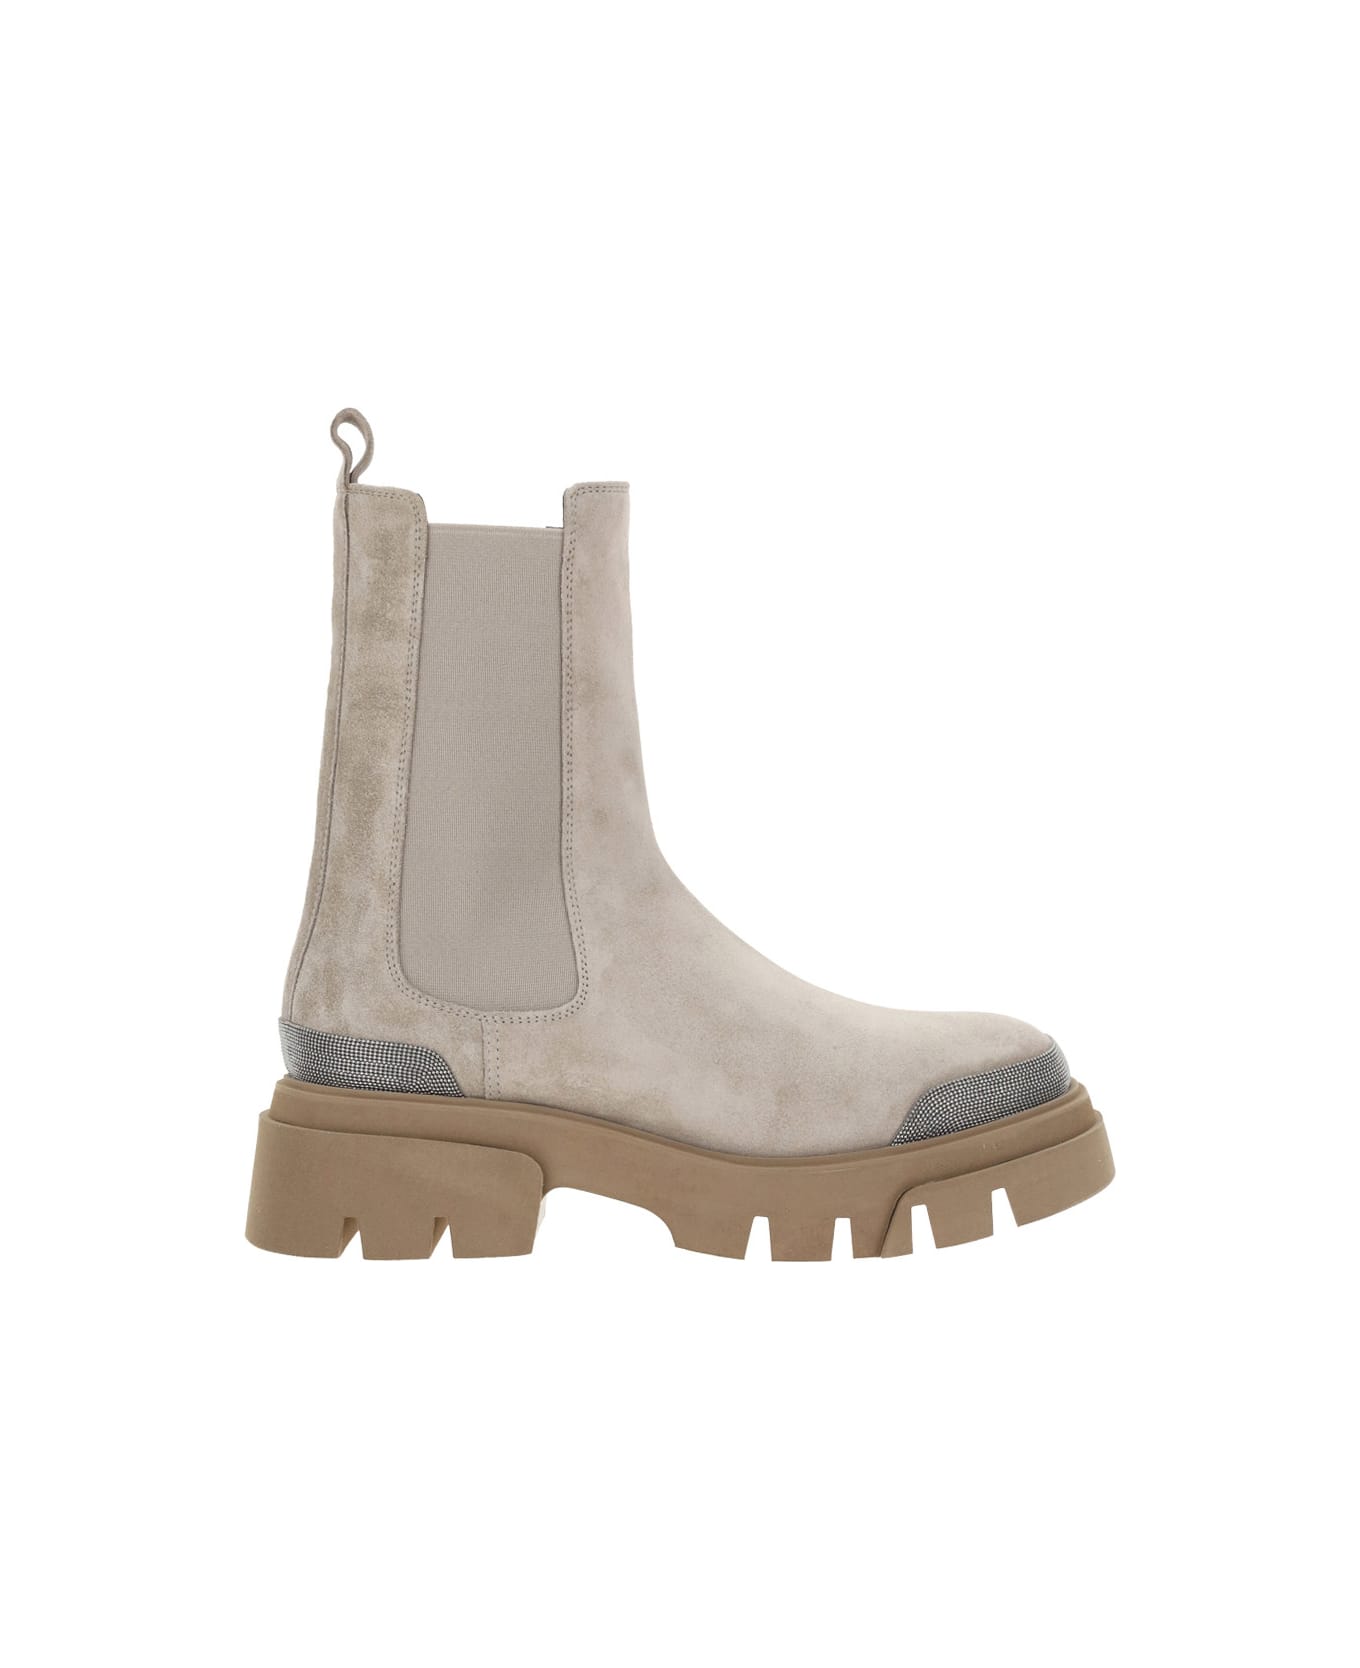 Brunello Cucinelli Ankle Boots - Light Grey